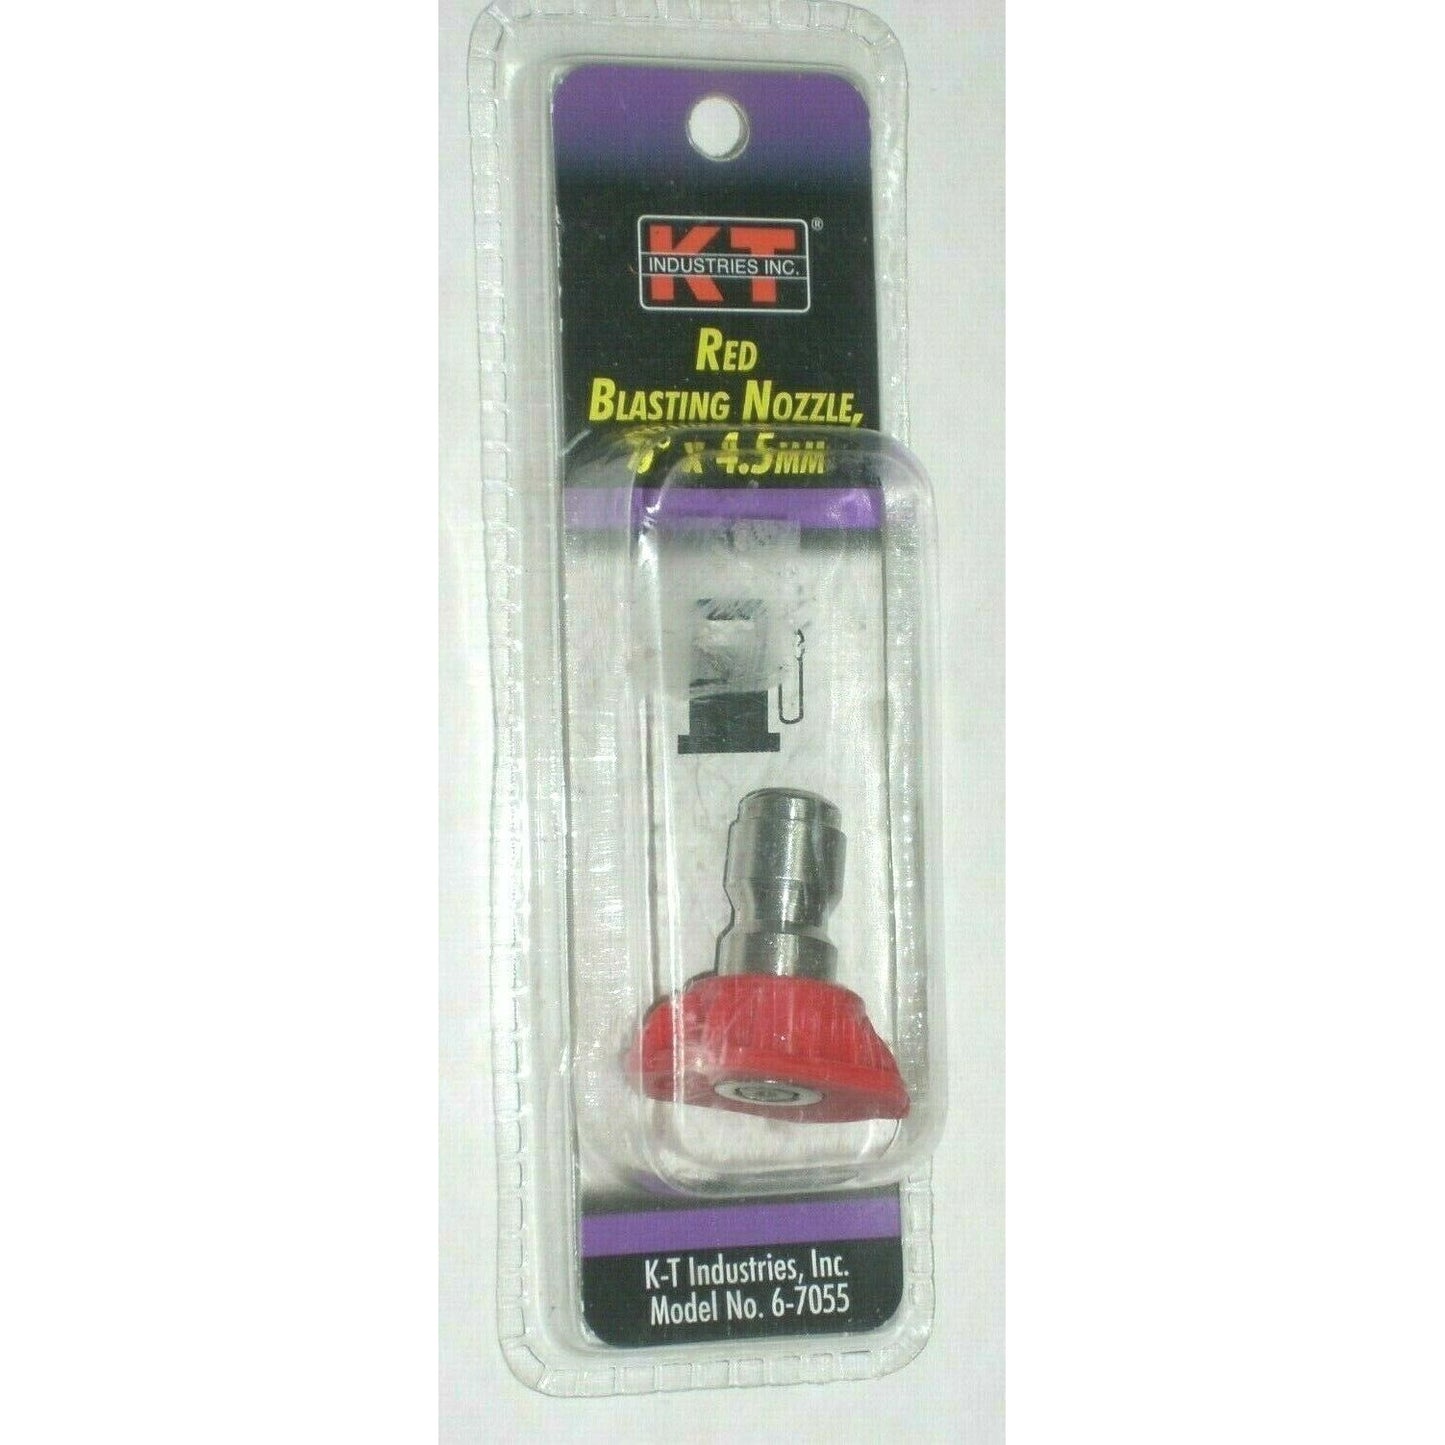 KT Industries 6-7055 Red Blasting Nozzle 0 Deg x 4.5 mm for Pressure Washer Tip